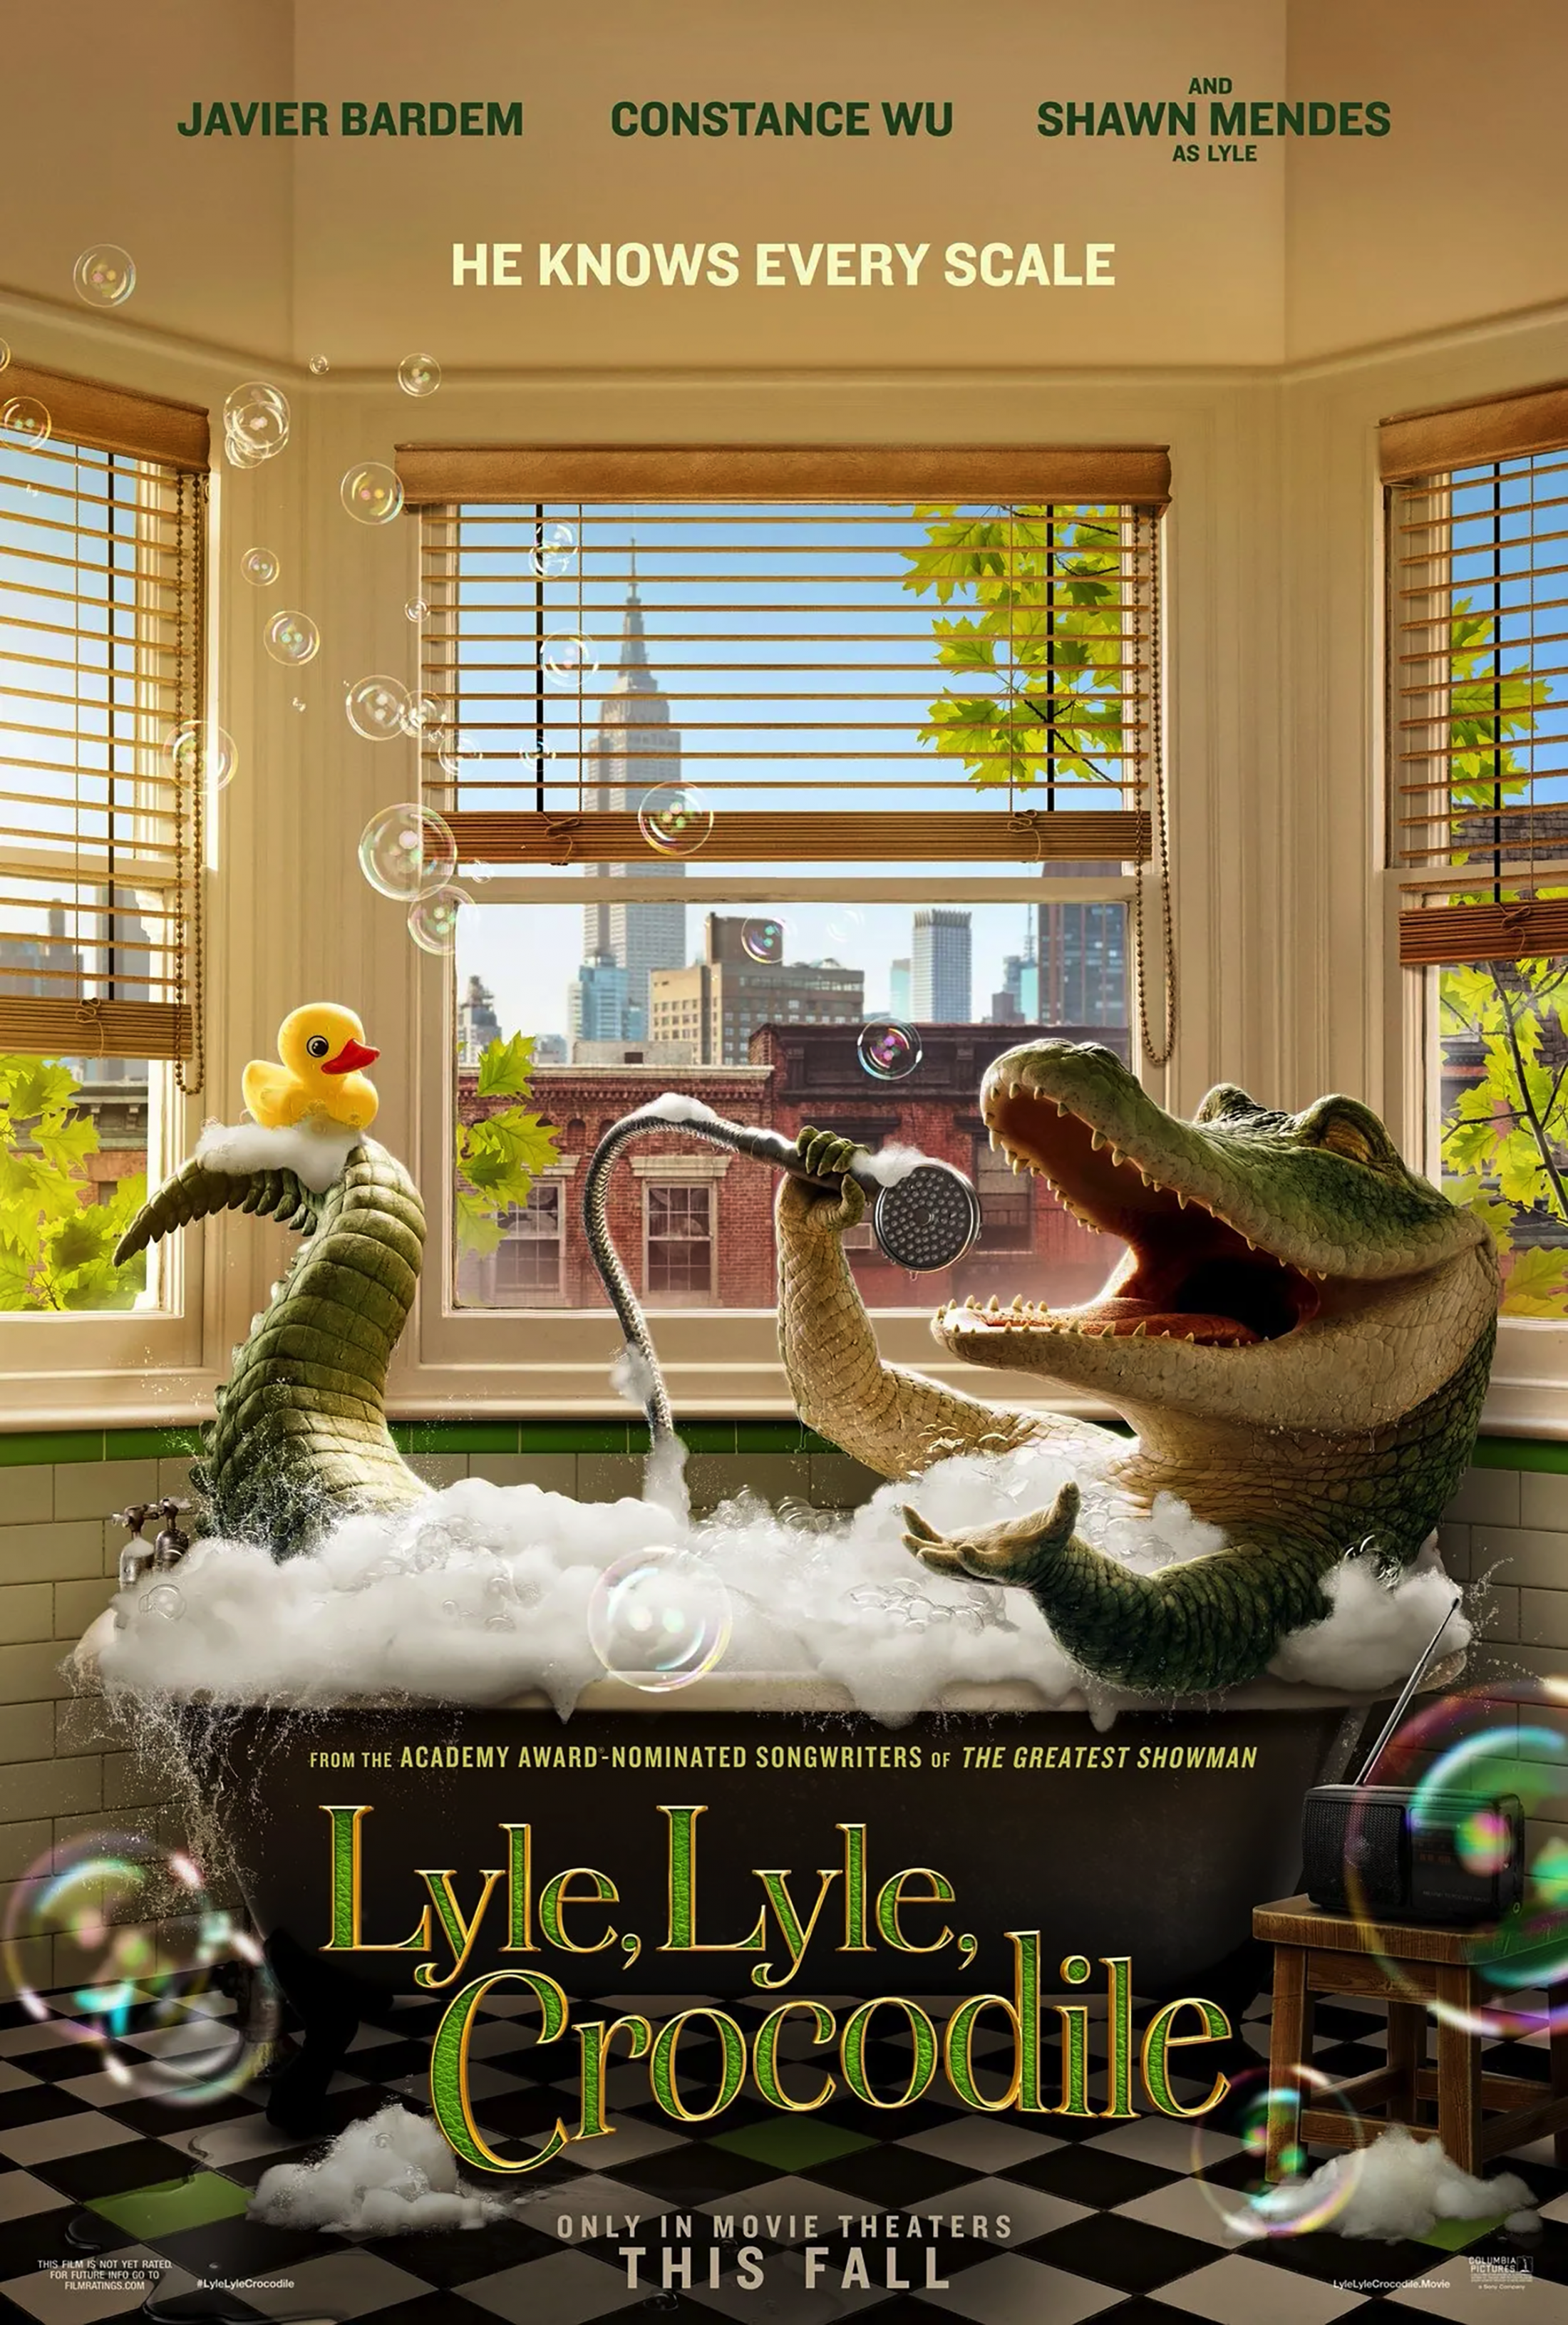 Lyle, Lyle Crocodile movie poster. Crocodile sitting in bathtub full of bubbles using the showerhead as a microphone.